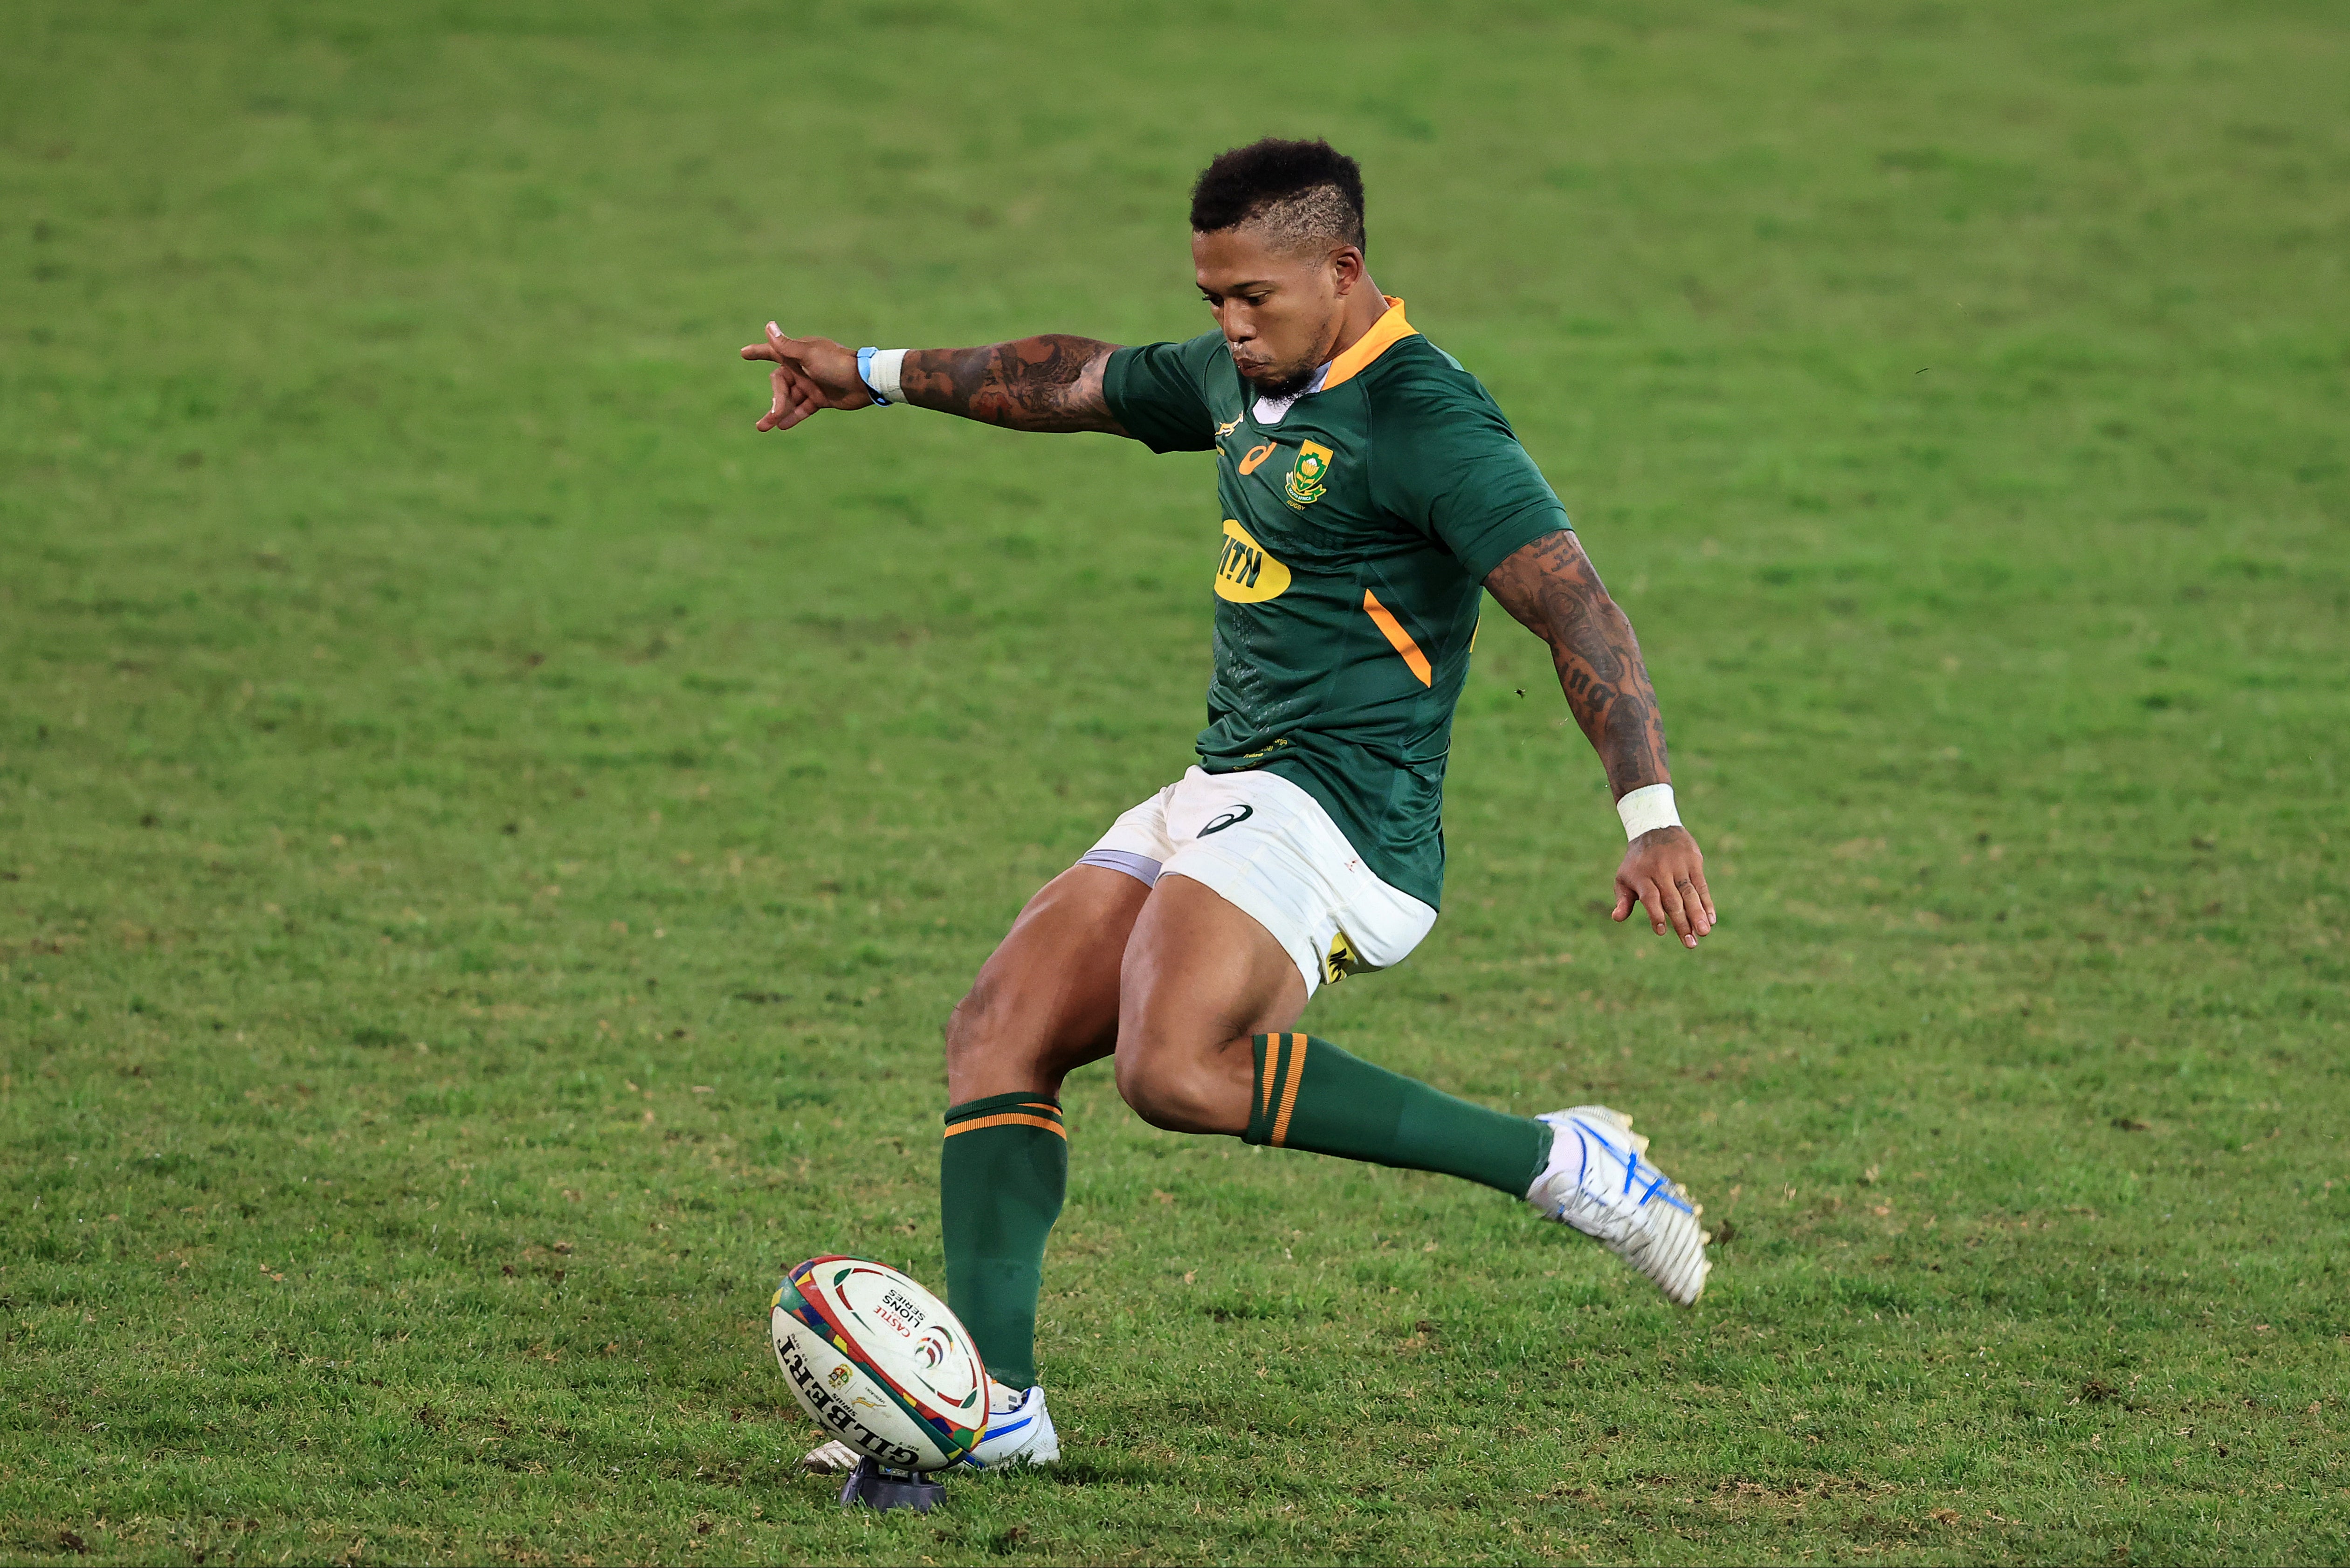 Elton Jantjies won the last of his 46 South Africa caps in 2022